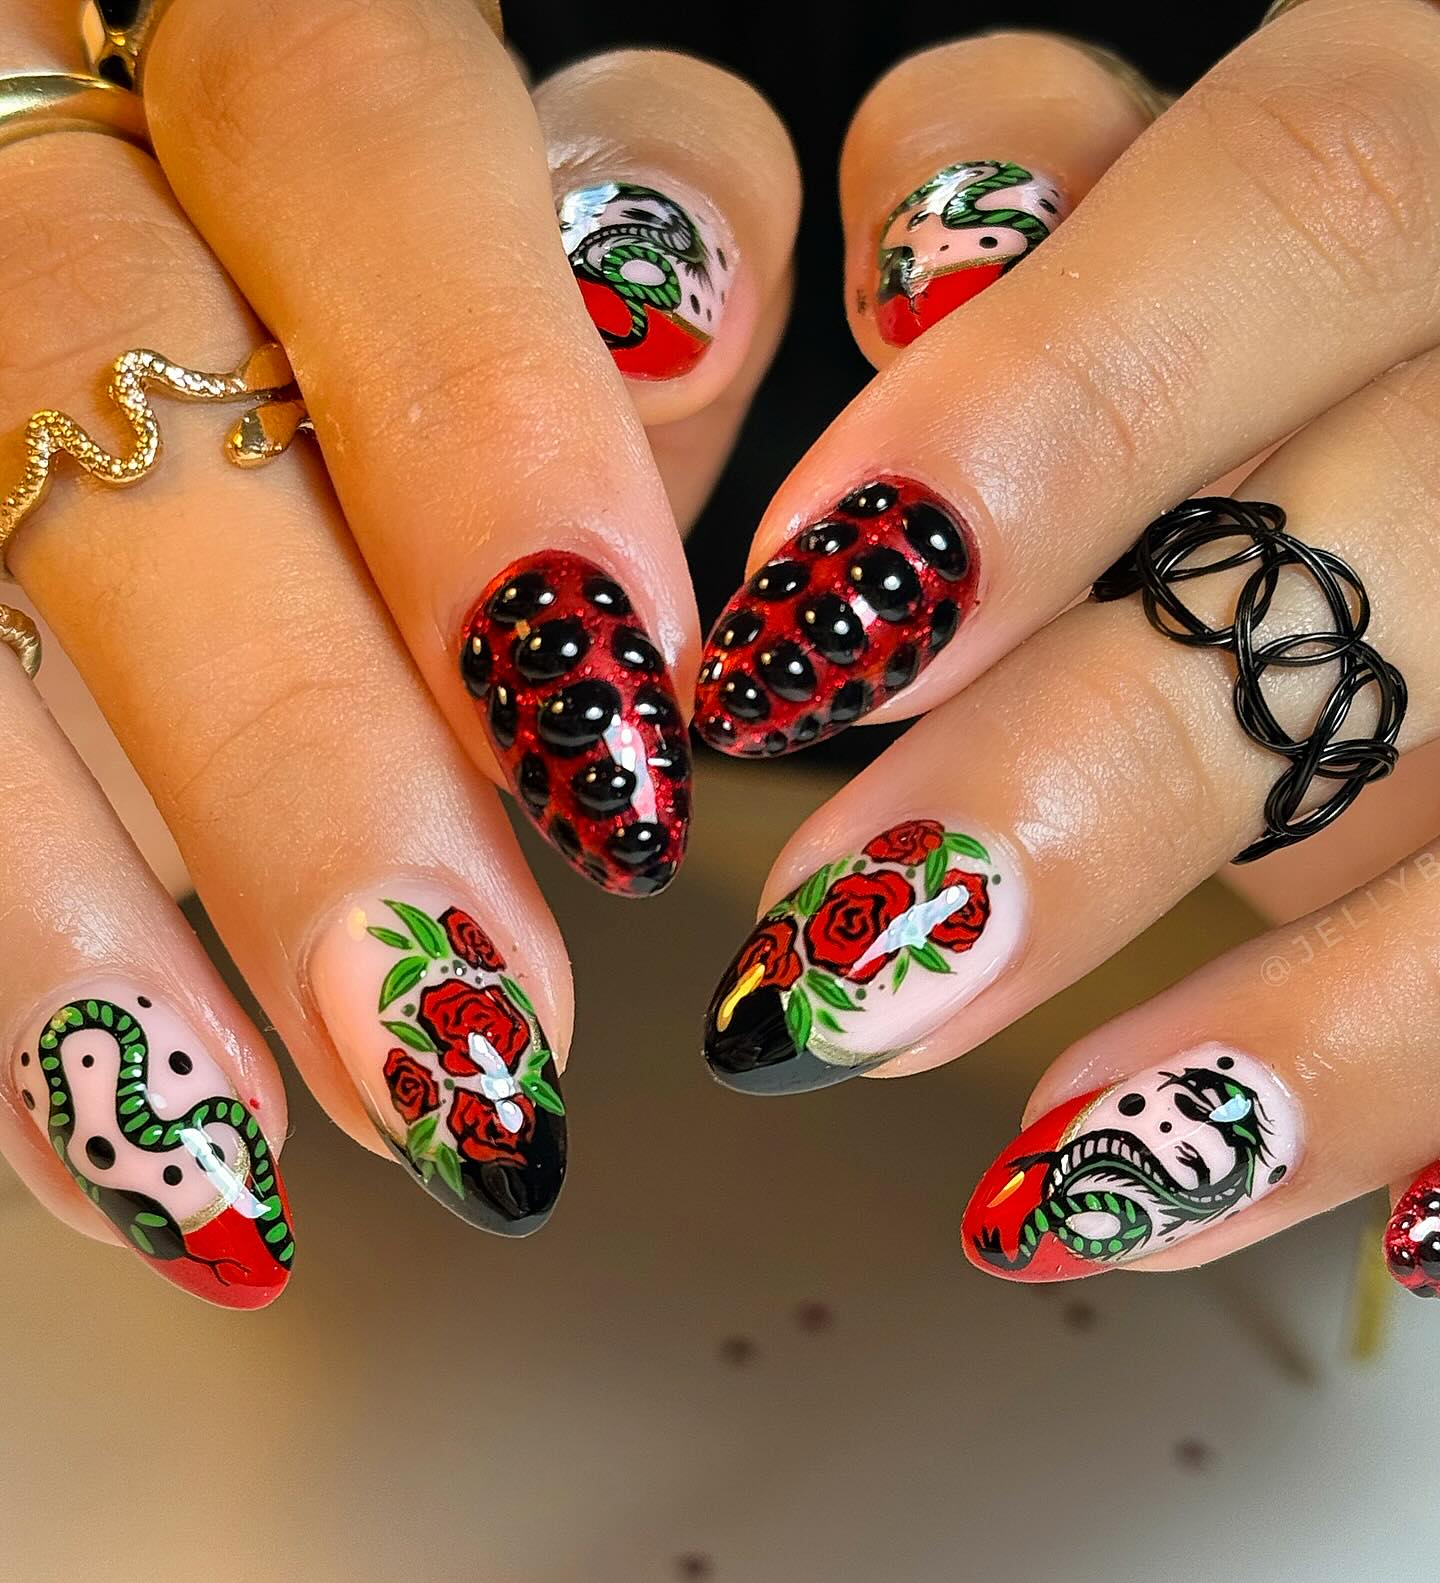 100+ Short Nail Designs You’ll Want To Try This Year images 67